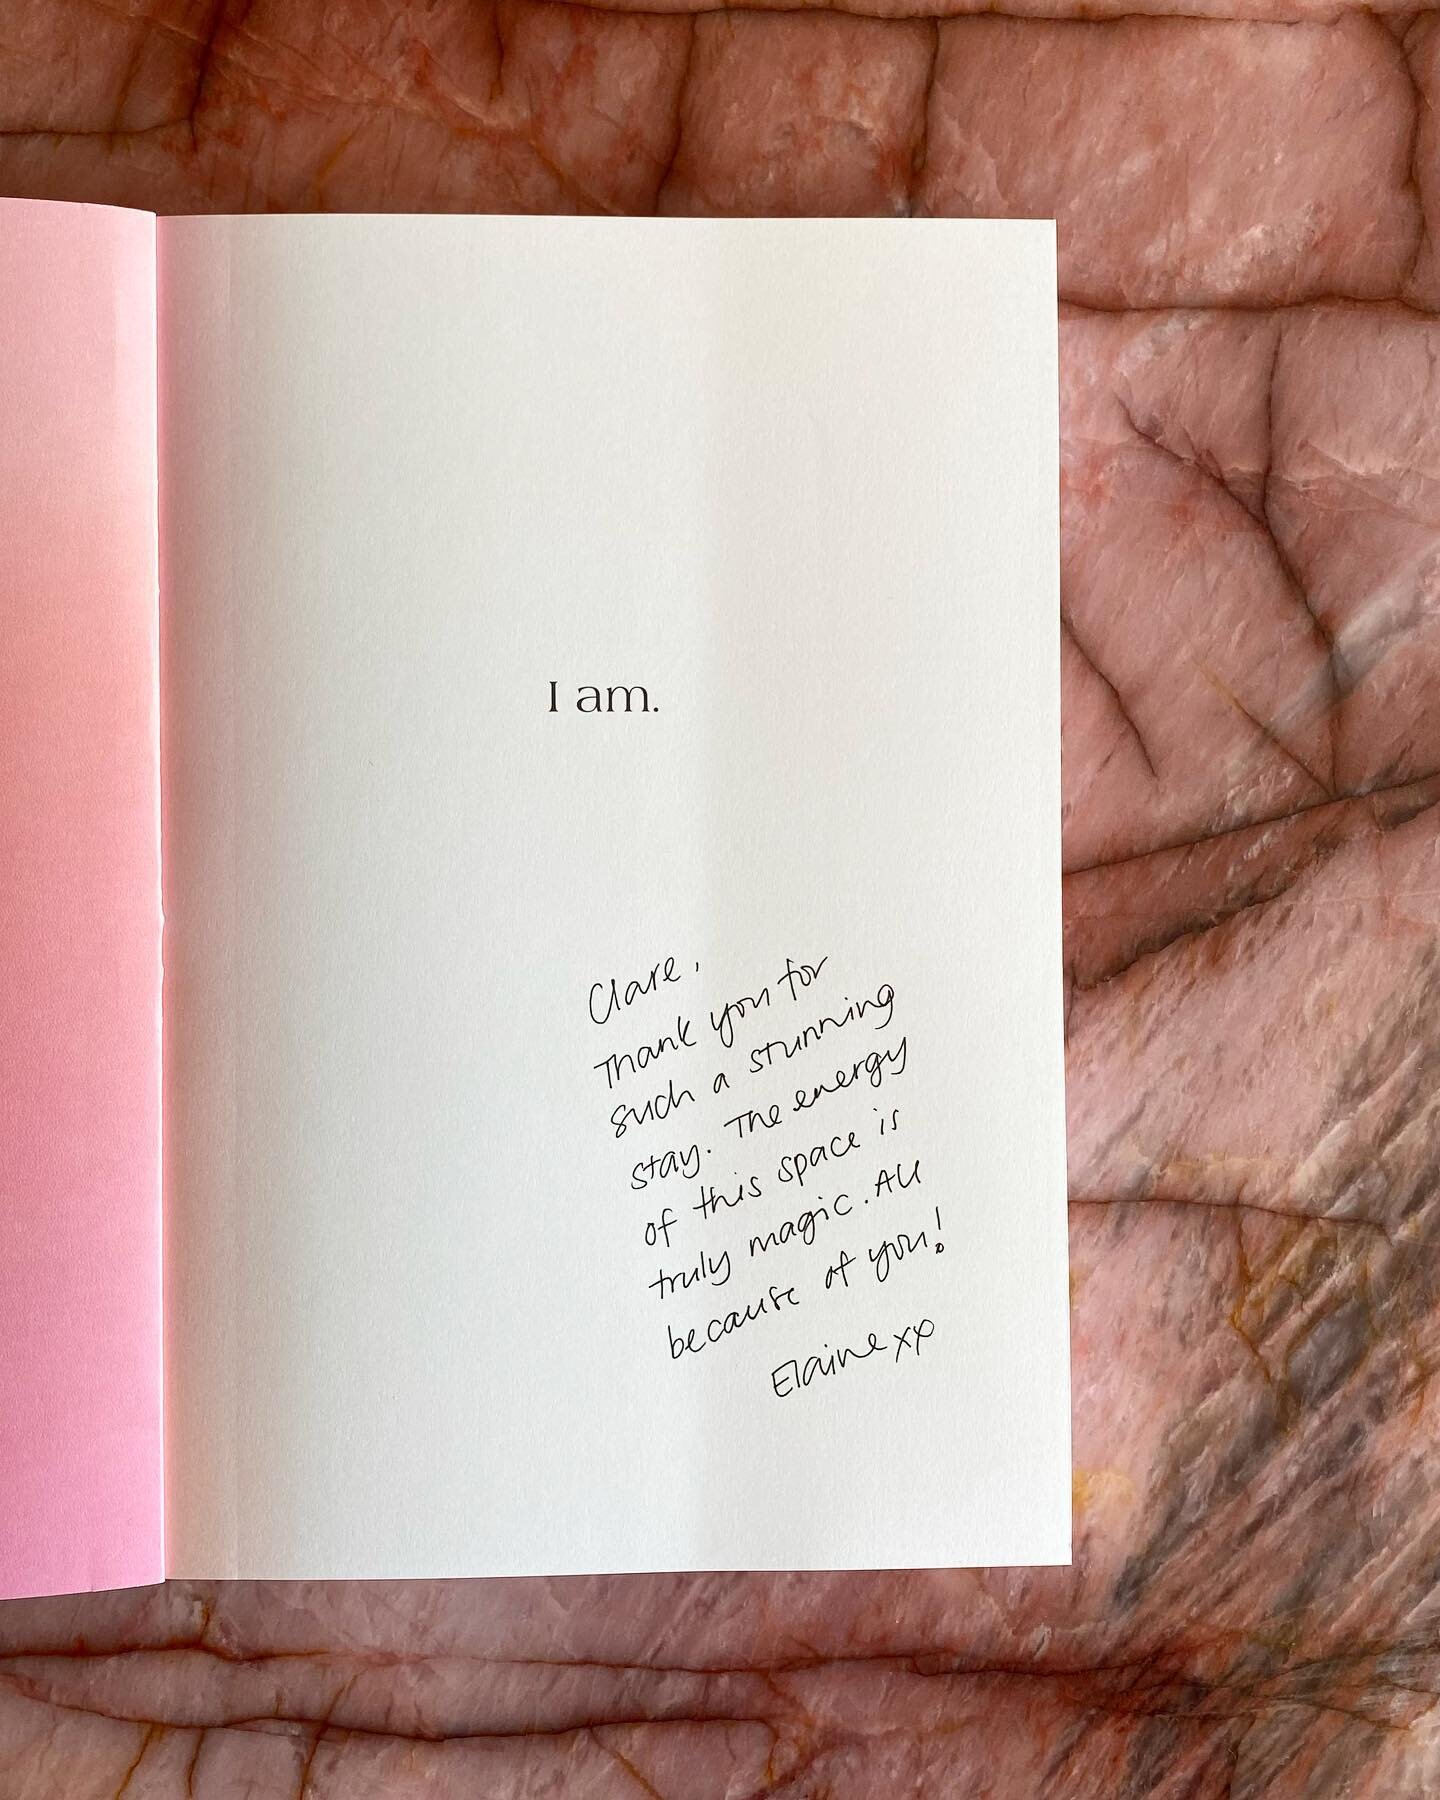 Our latest guest, @elaine__so, left the loveliest note in a copy of her book, &lsquo;I Am&rsquo; that has now been added to our Camillo library. 

It&rsquo;s so special seeing our seaside escape evolve, each guest often leaving their mark and adding 